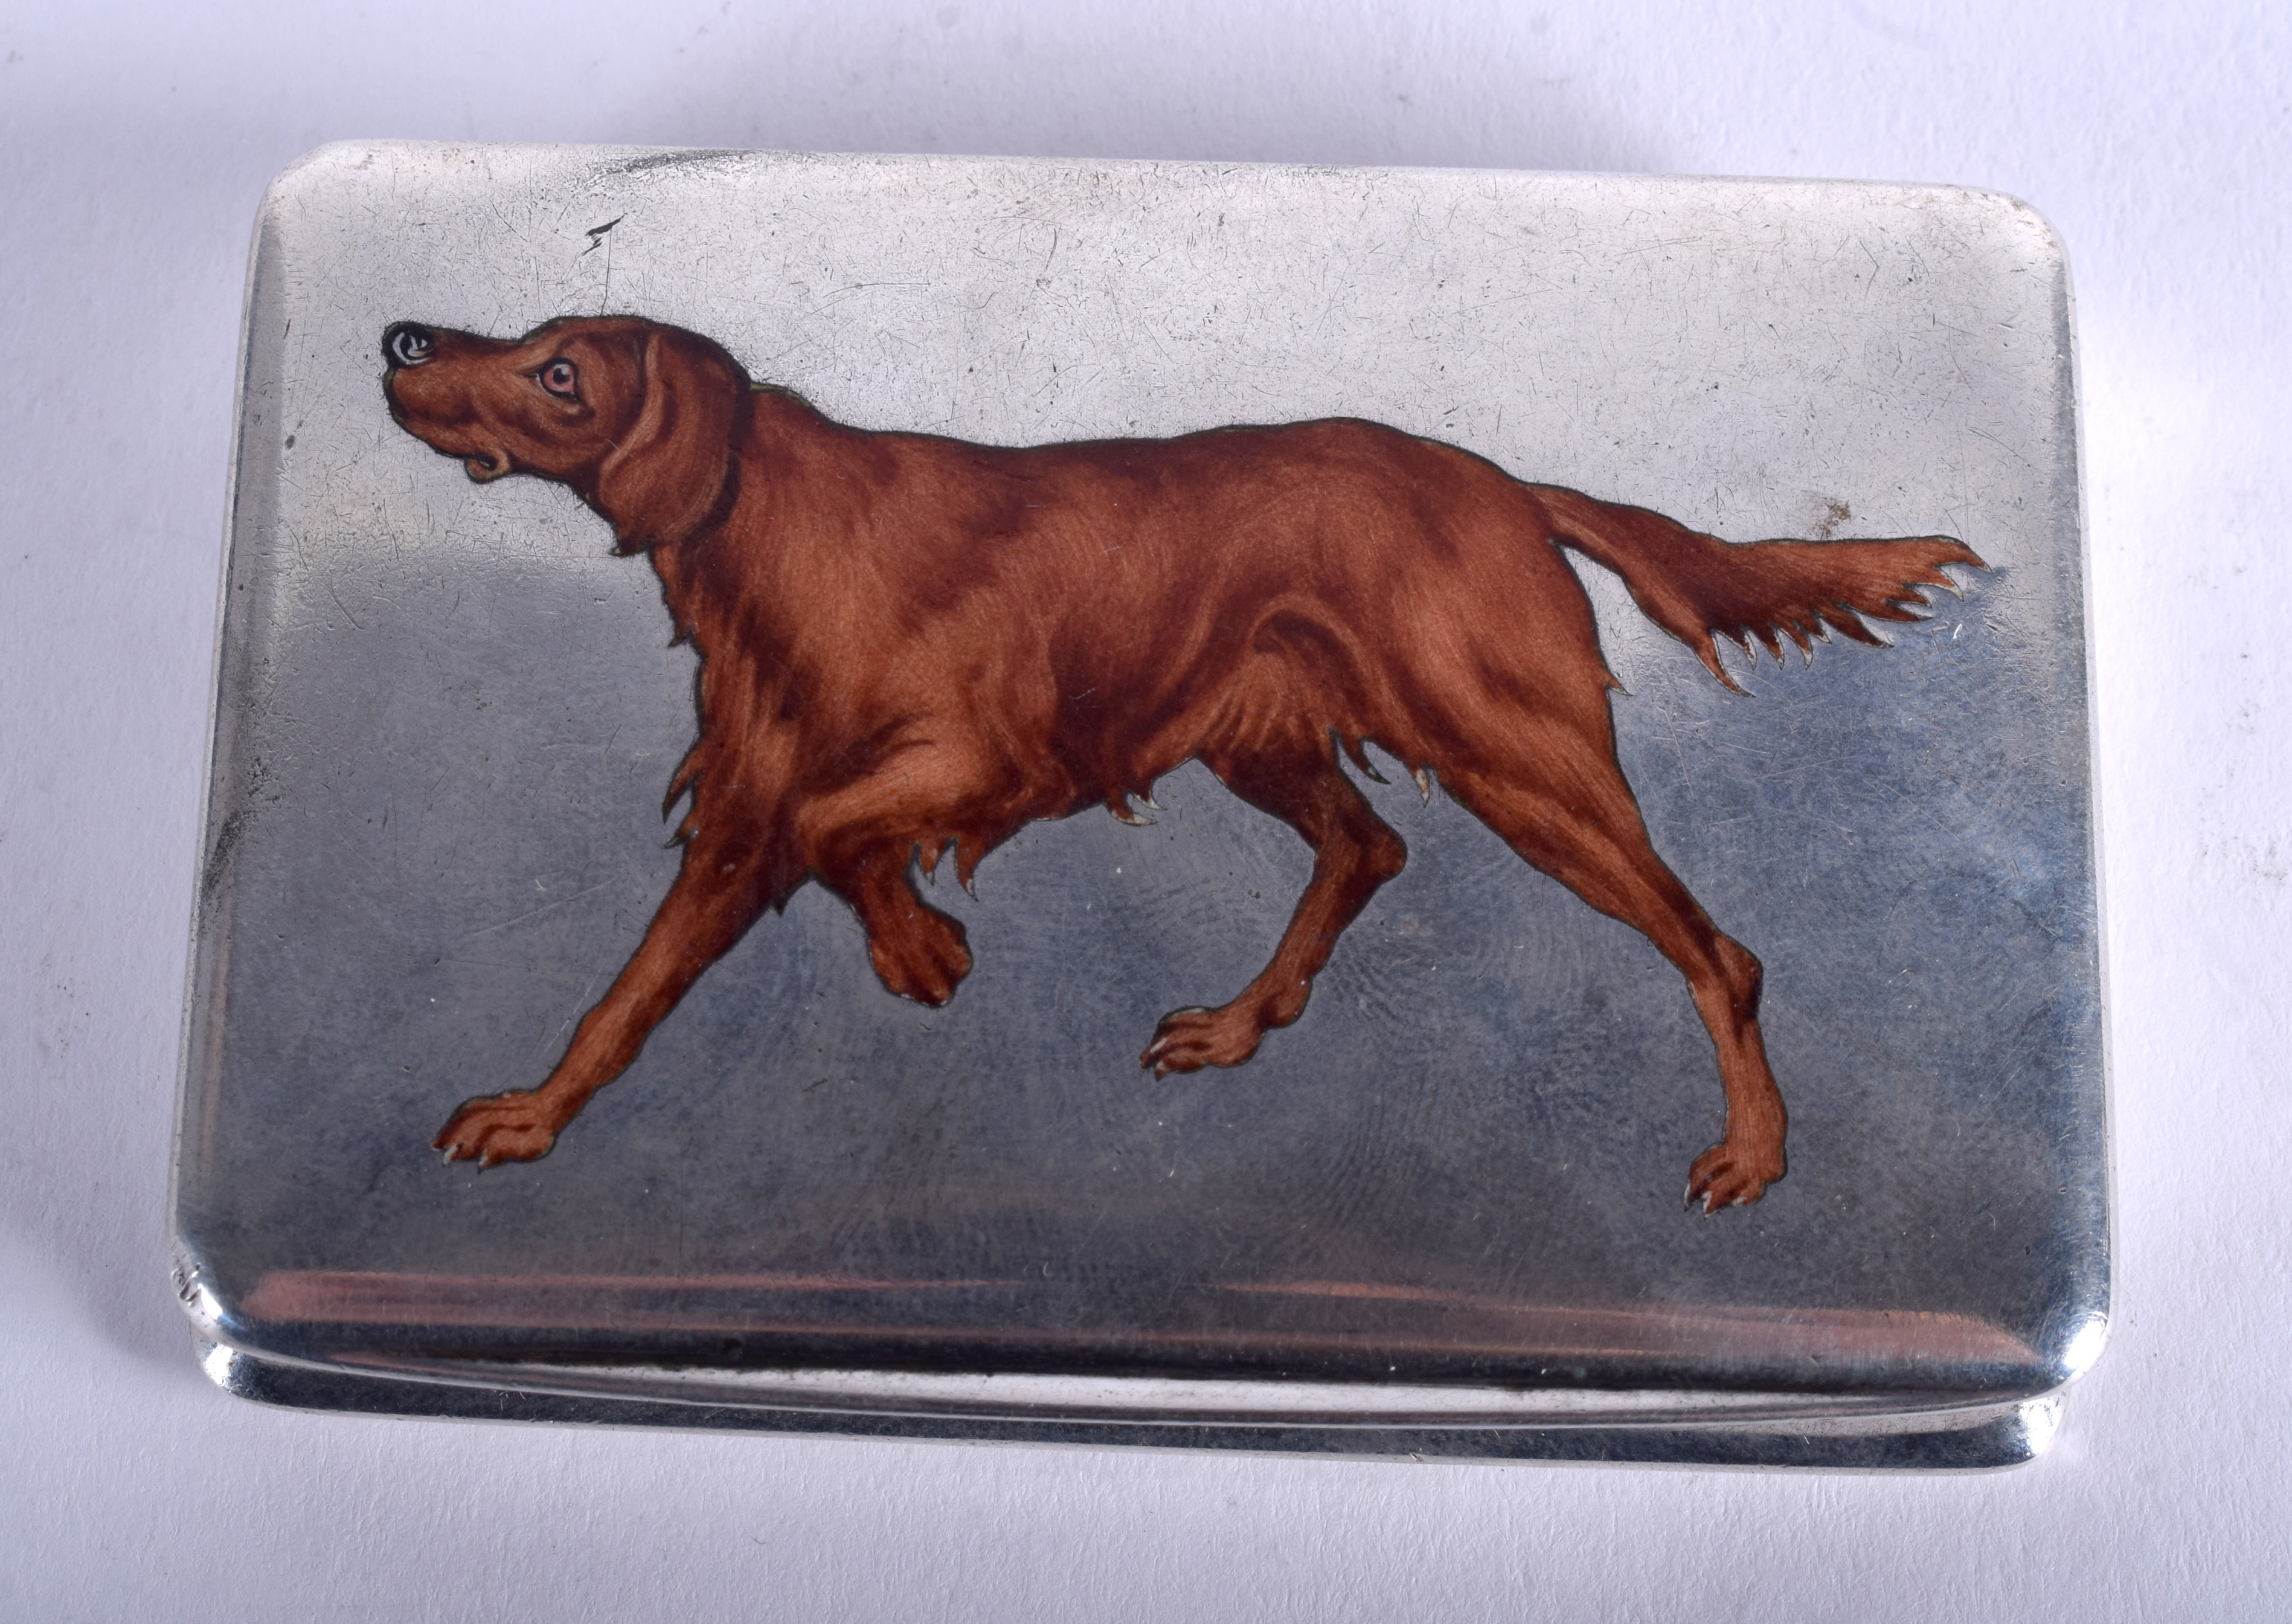 AN ART DECO CONTINENTAL SILVER AND ENAMEL SNUFF BOX painted with a dog. 2.4 oz. 7.5 cm x 5.5 cm.